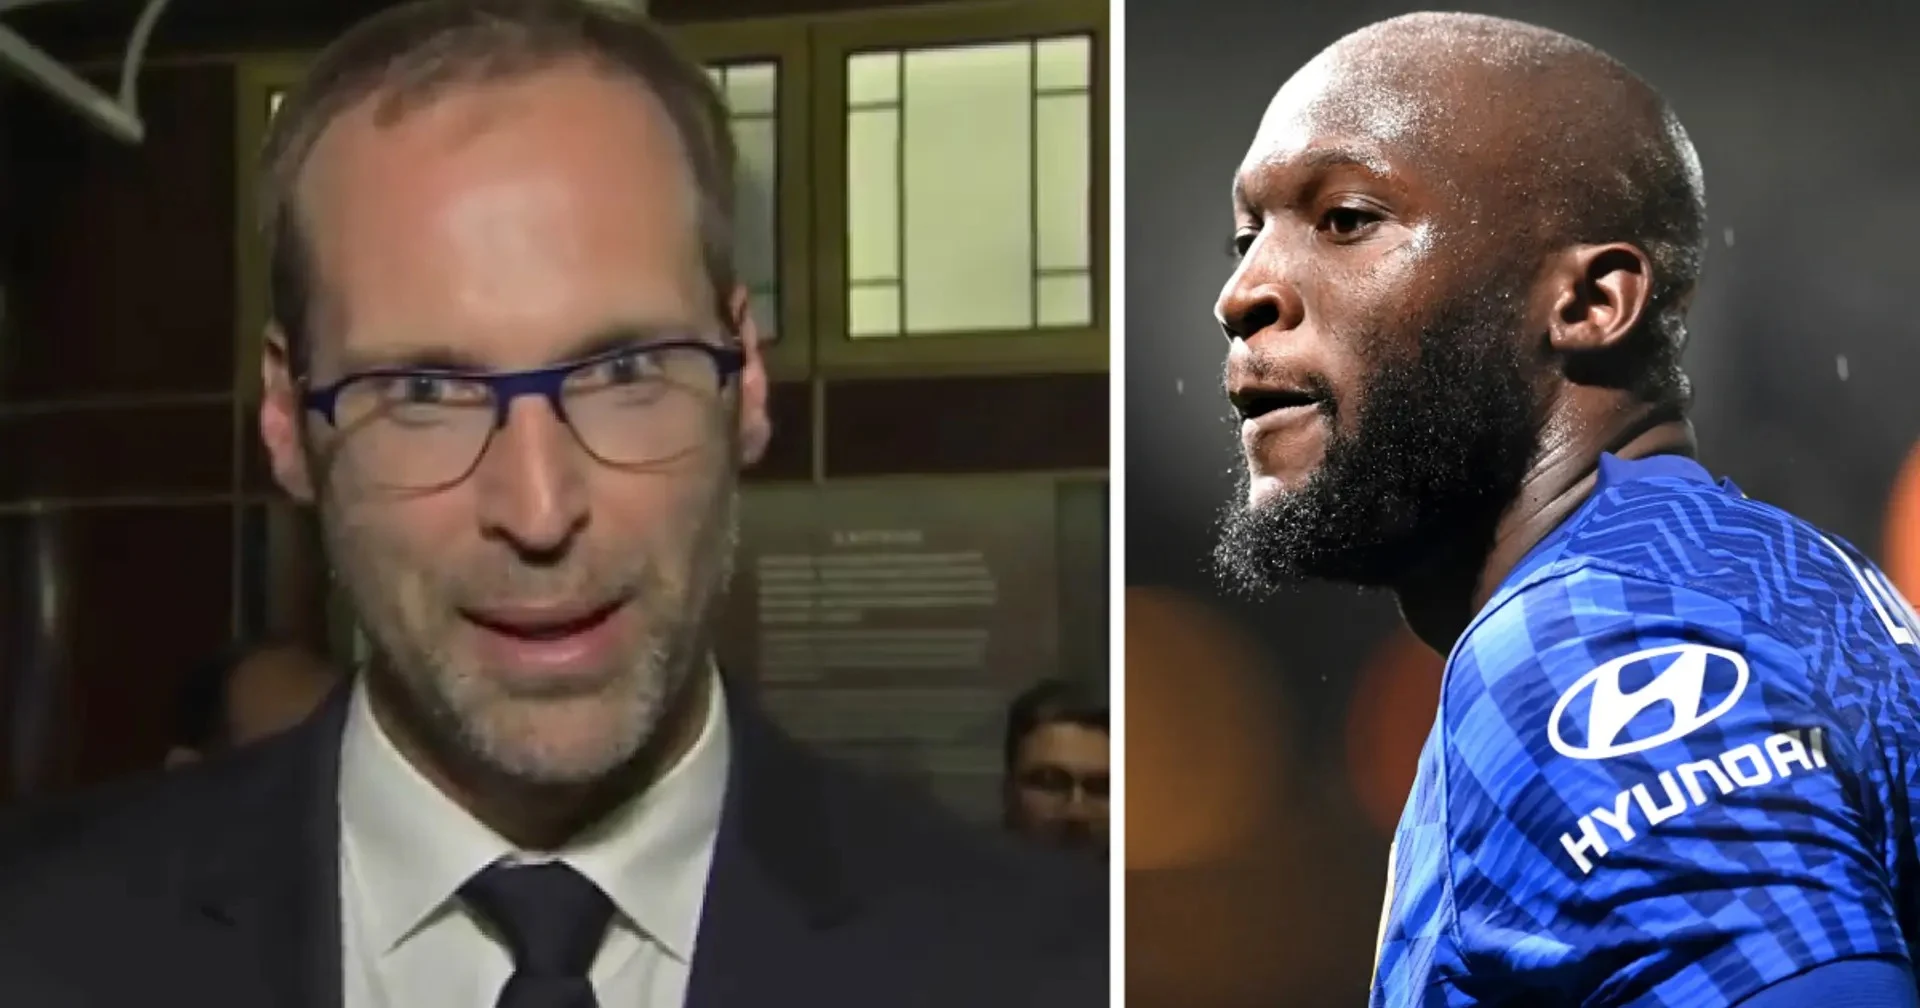 'He will have a great season': Petr Cech pours cold water on Lukaku exit rumours